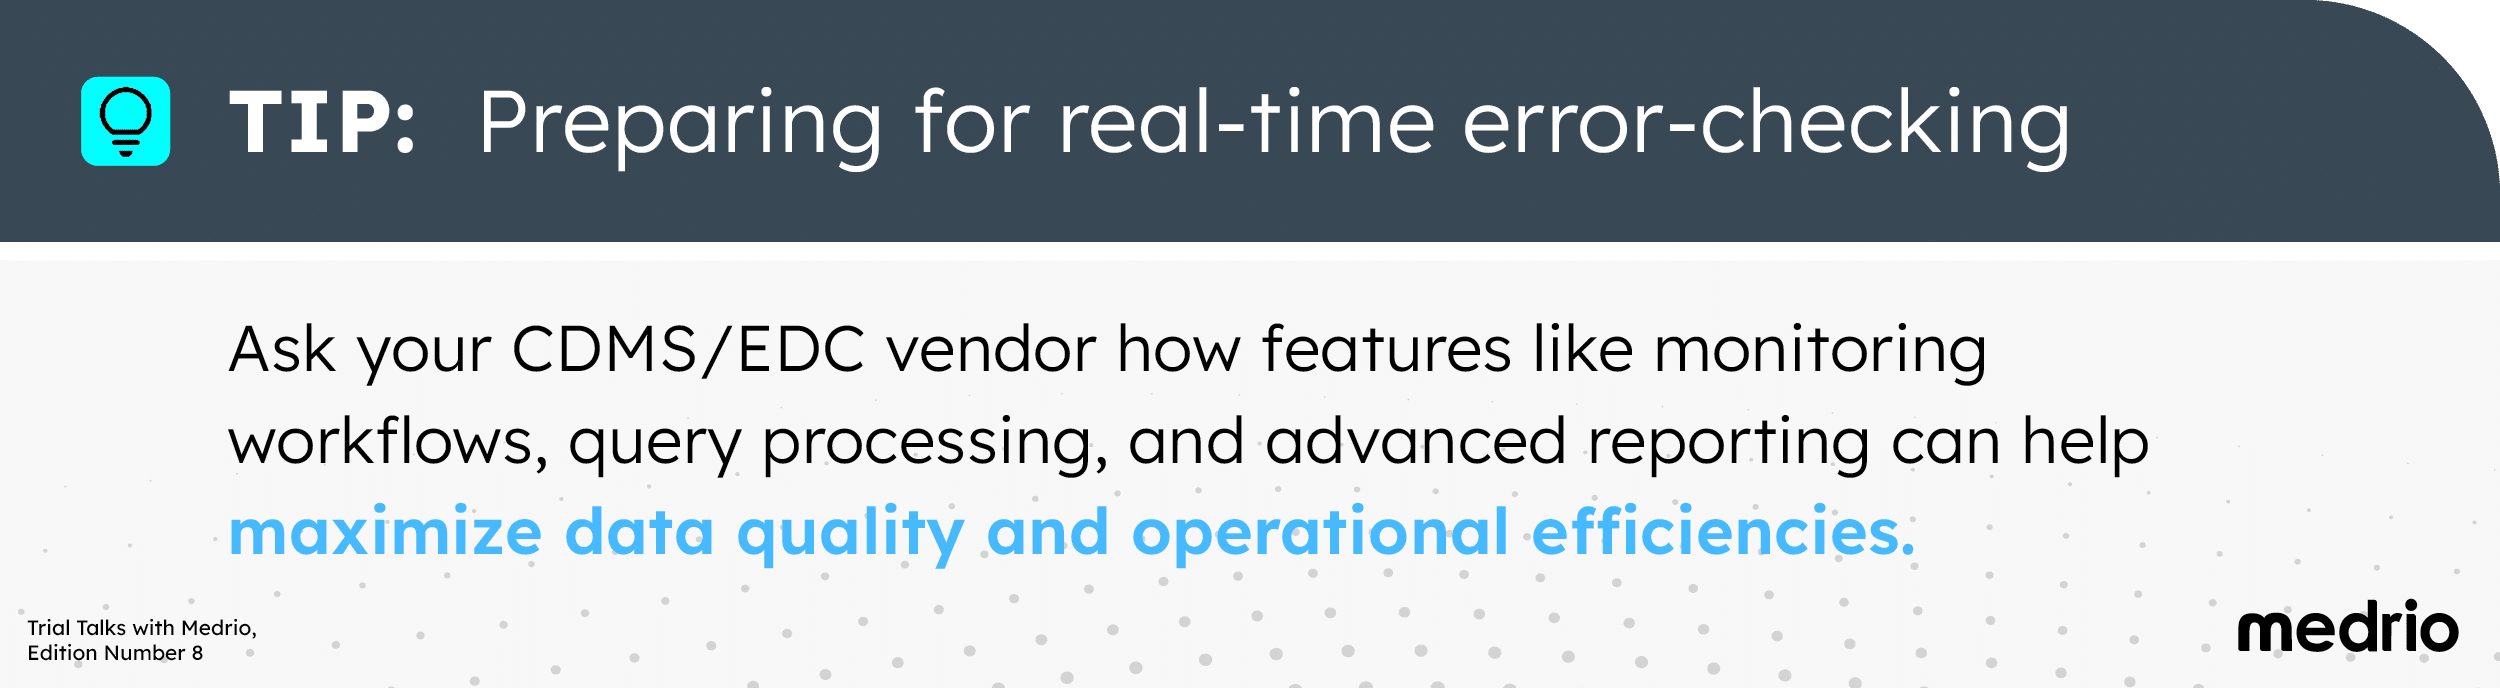 [Image] Tip for preparing for real-time error-checking - Ask your CDMS/EDC vendor how features like monitoring workflows, query processing, and advanced reporting can help maximize data quality and operational efficiencies.